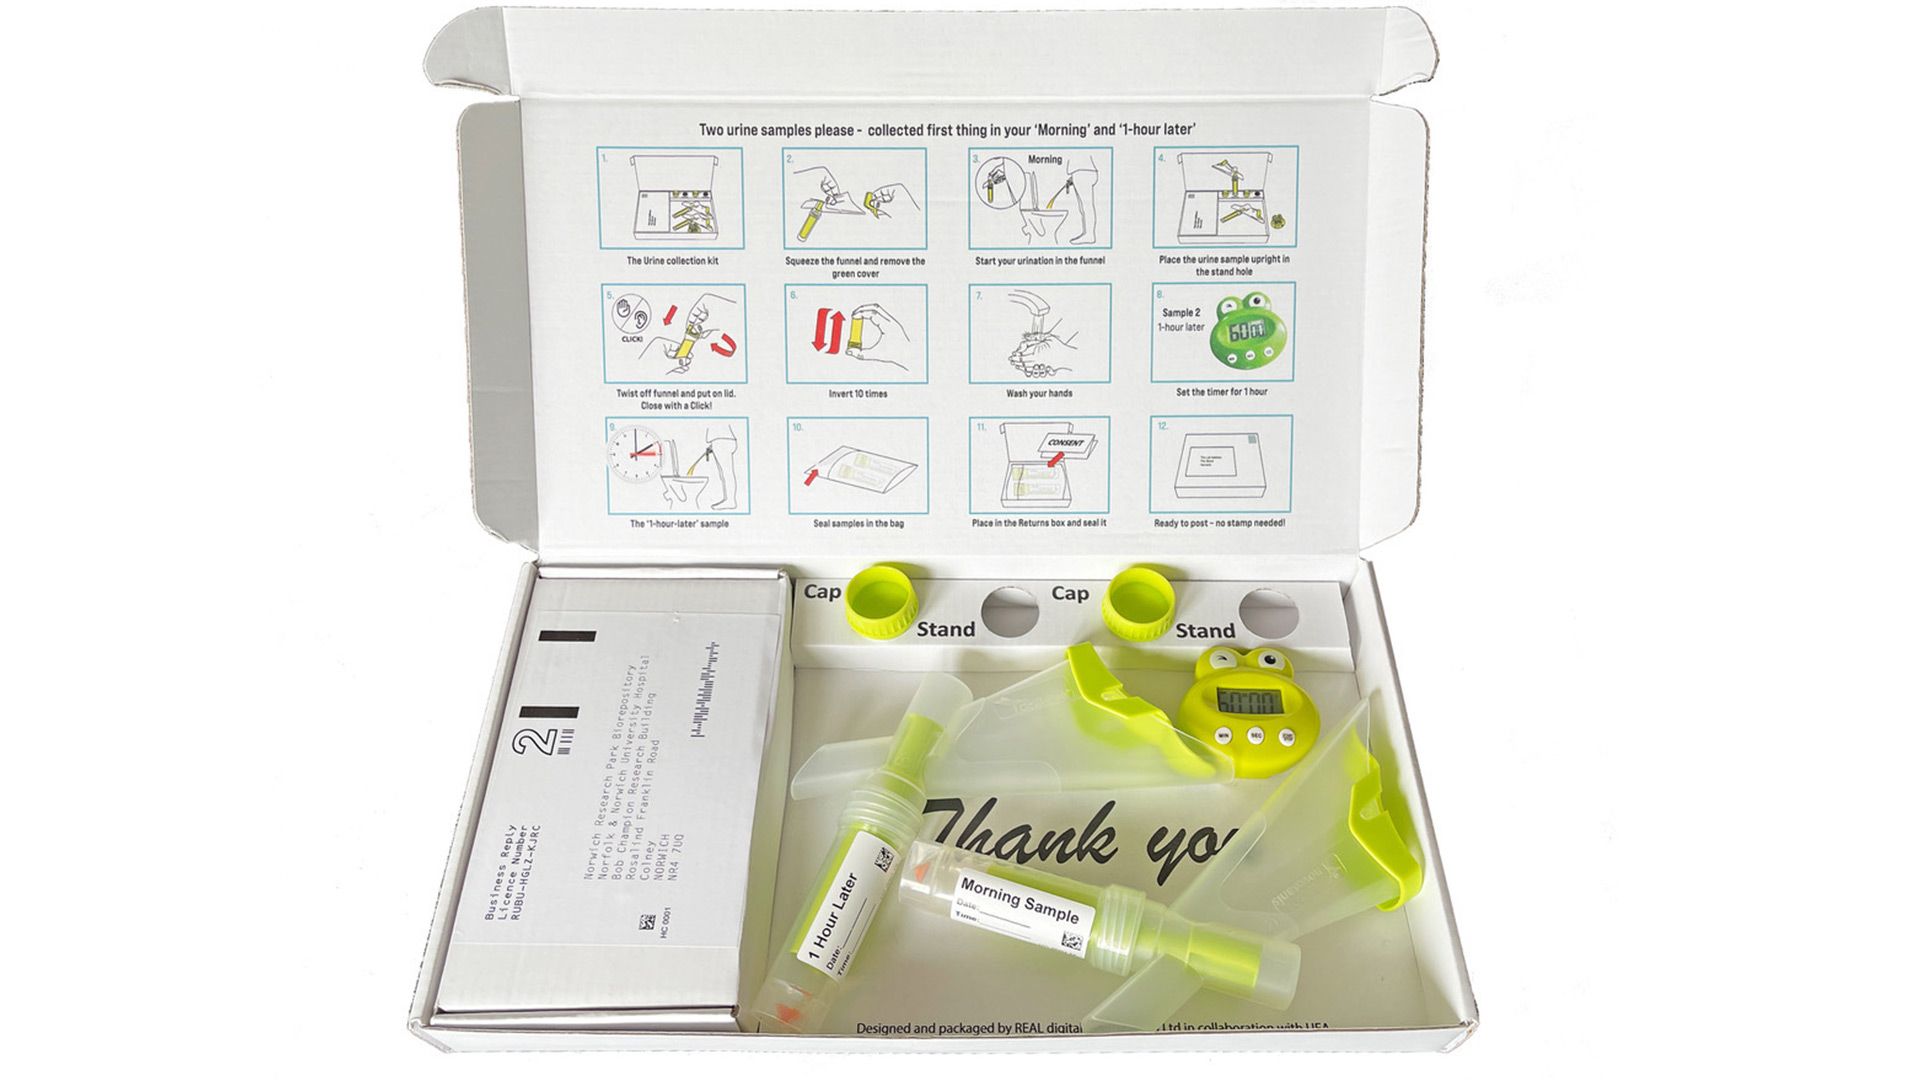 An image of the 'Prostate Screening Box' home test kit with usage instructions